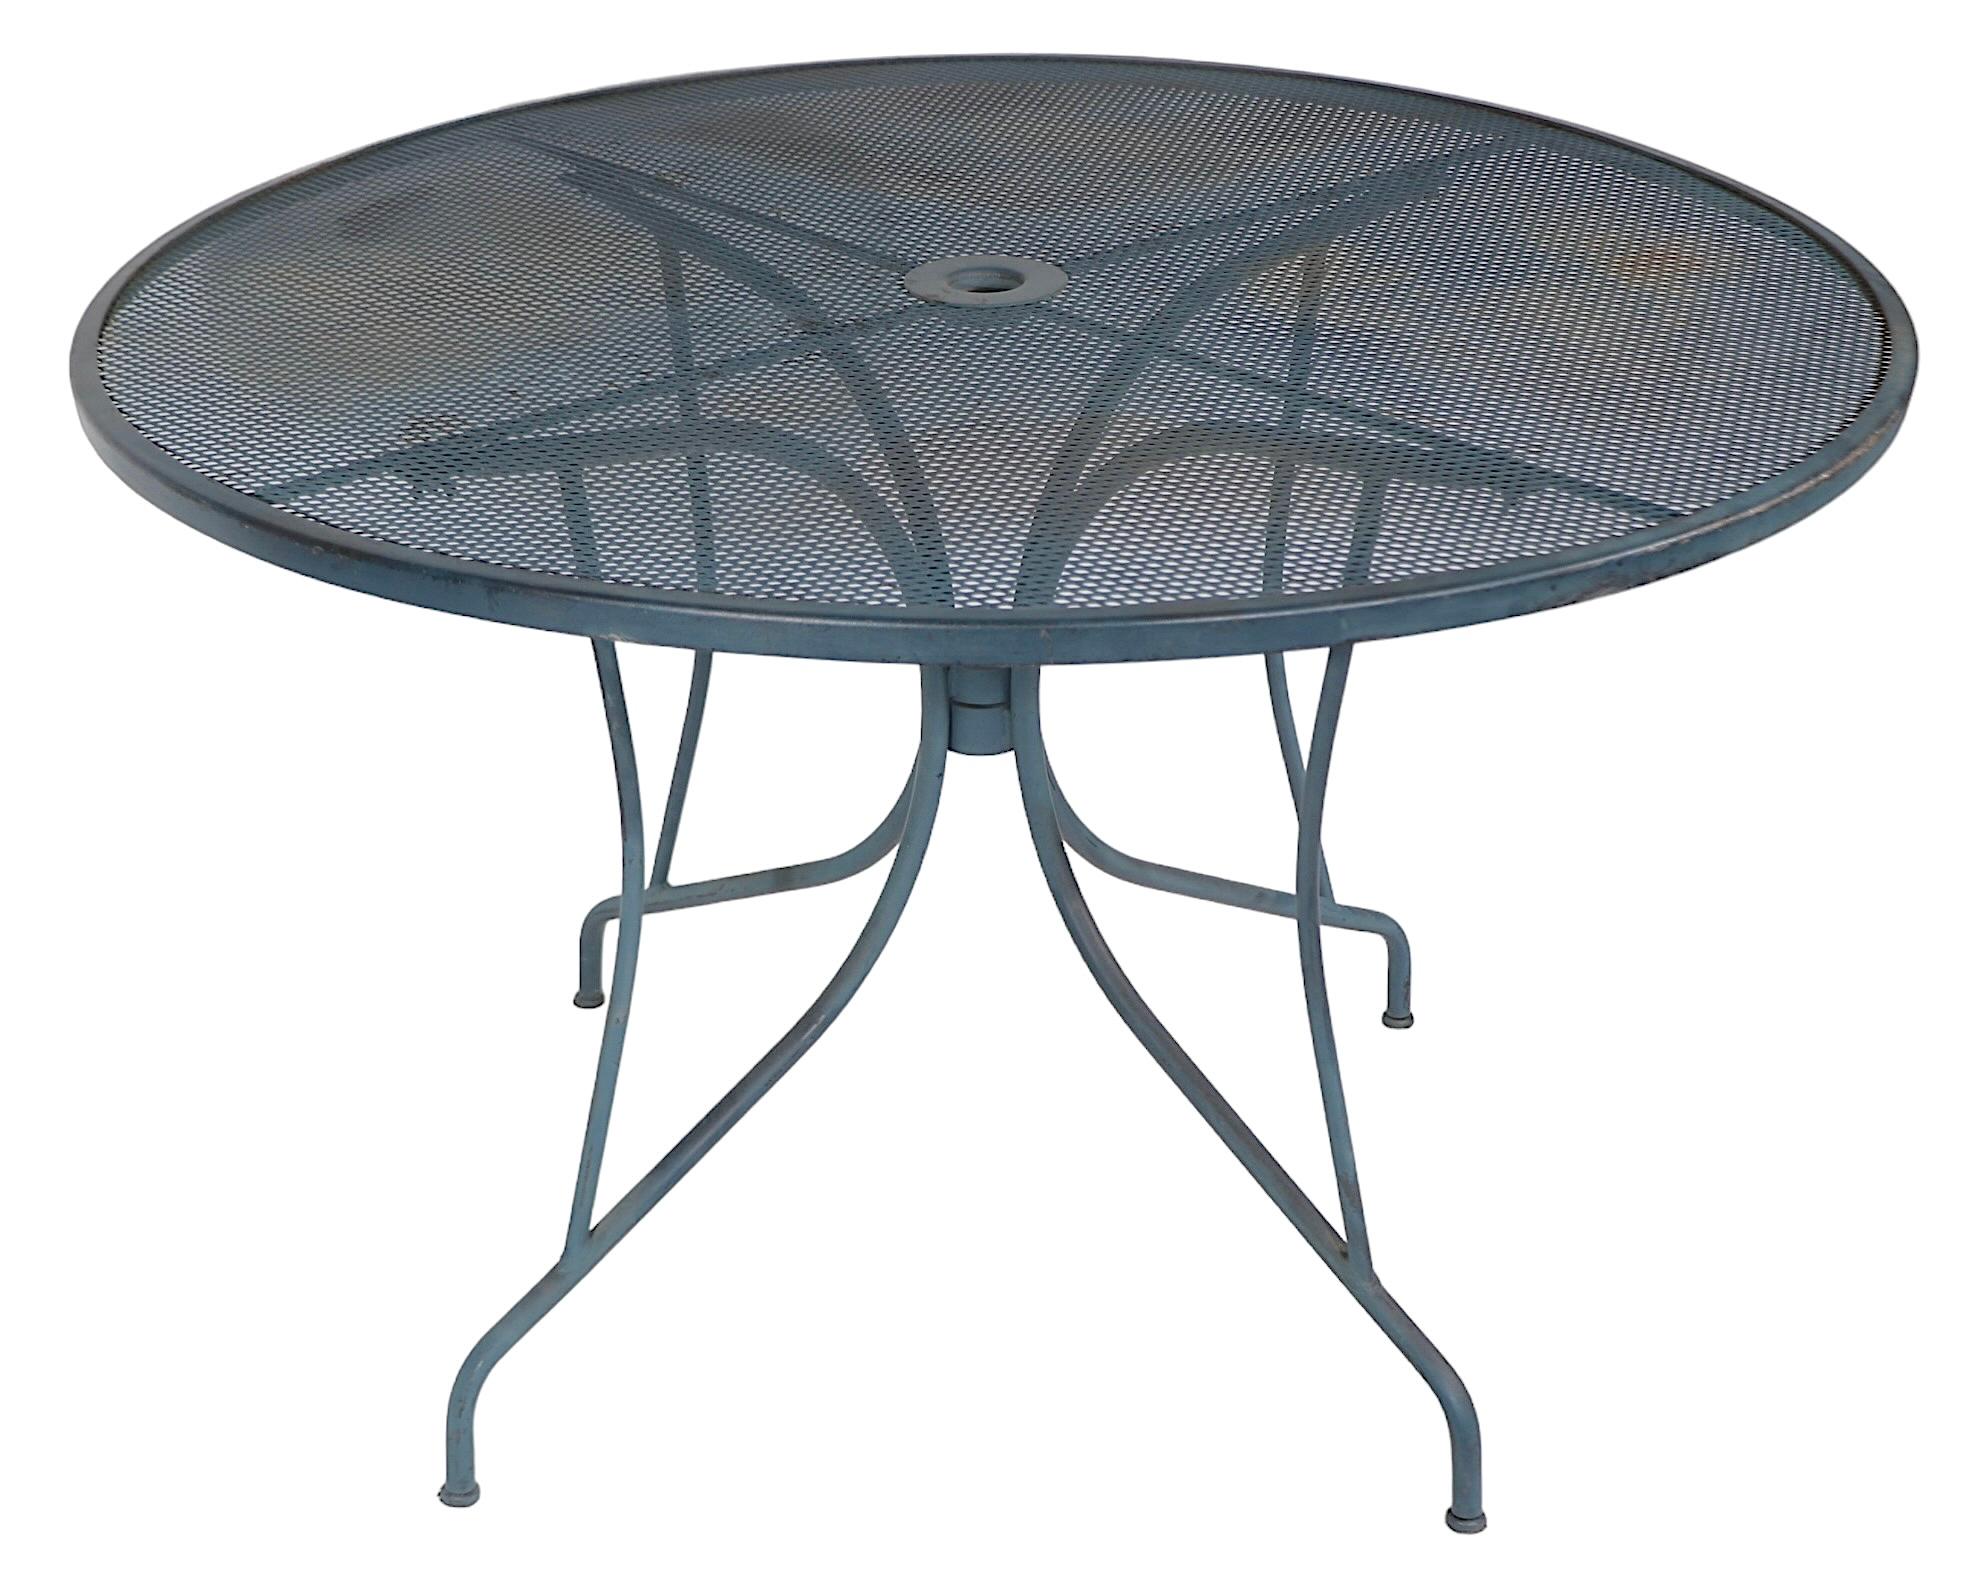 Mid-Century Modern Vintage Garden Patio Poolside Cafe Dining Table by Meadowcraft c. 1950/60's For Sale